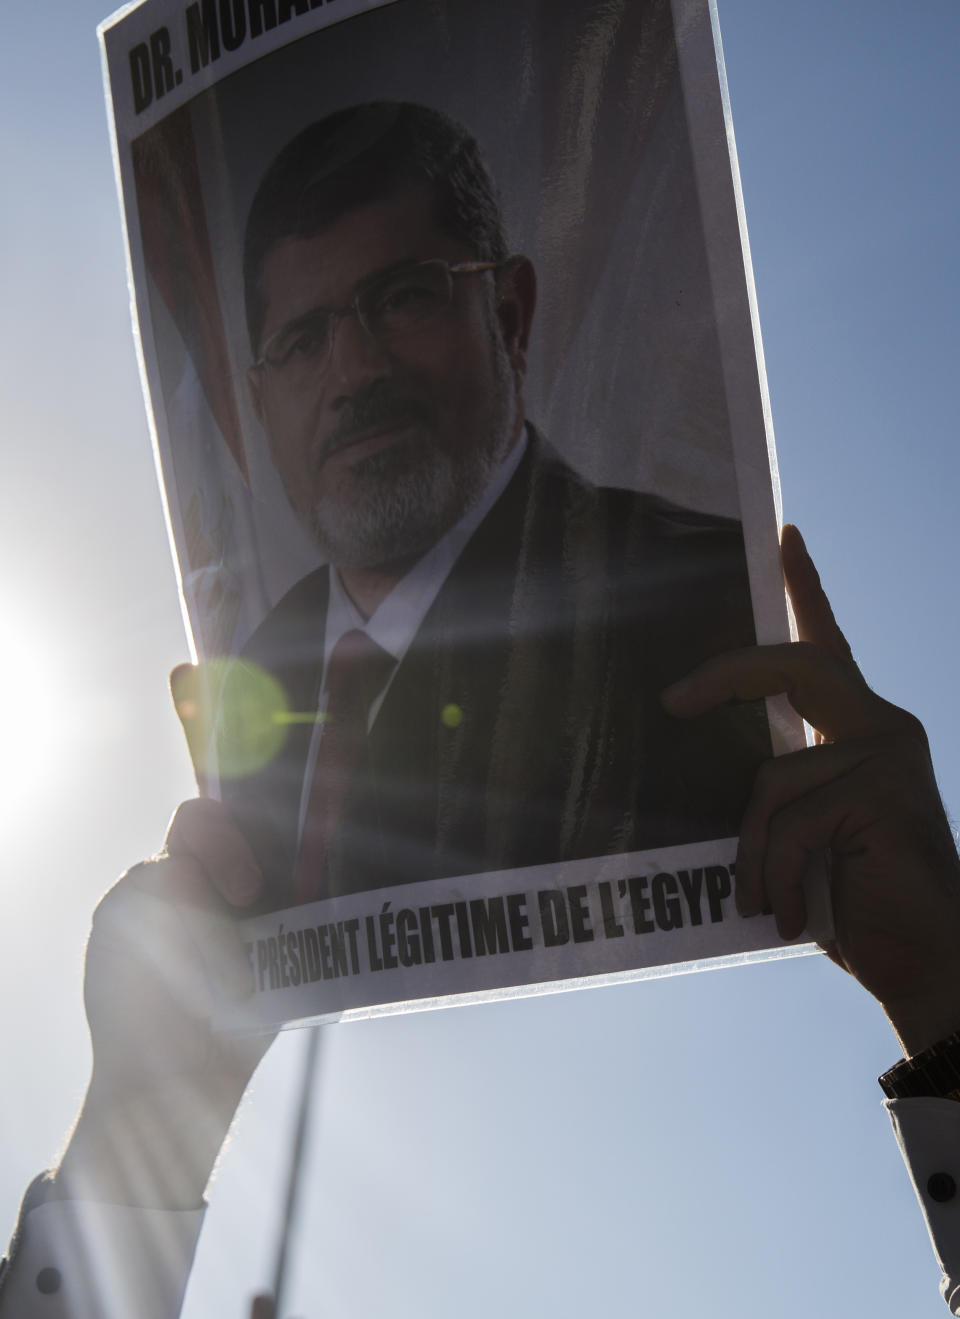 A man holds a picture of ousted former Egyptian President Mohammed Morsi in Tunis, Tunisia. Tuesday, June 18, 2019. The former president, who was ousted by current President Abdel-Fattah el-Sissi in a military coup in 2013, collapsed in a courtroom in Egypt during trial on Monday and died. (AP Photo/Hassene Dridi)